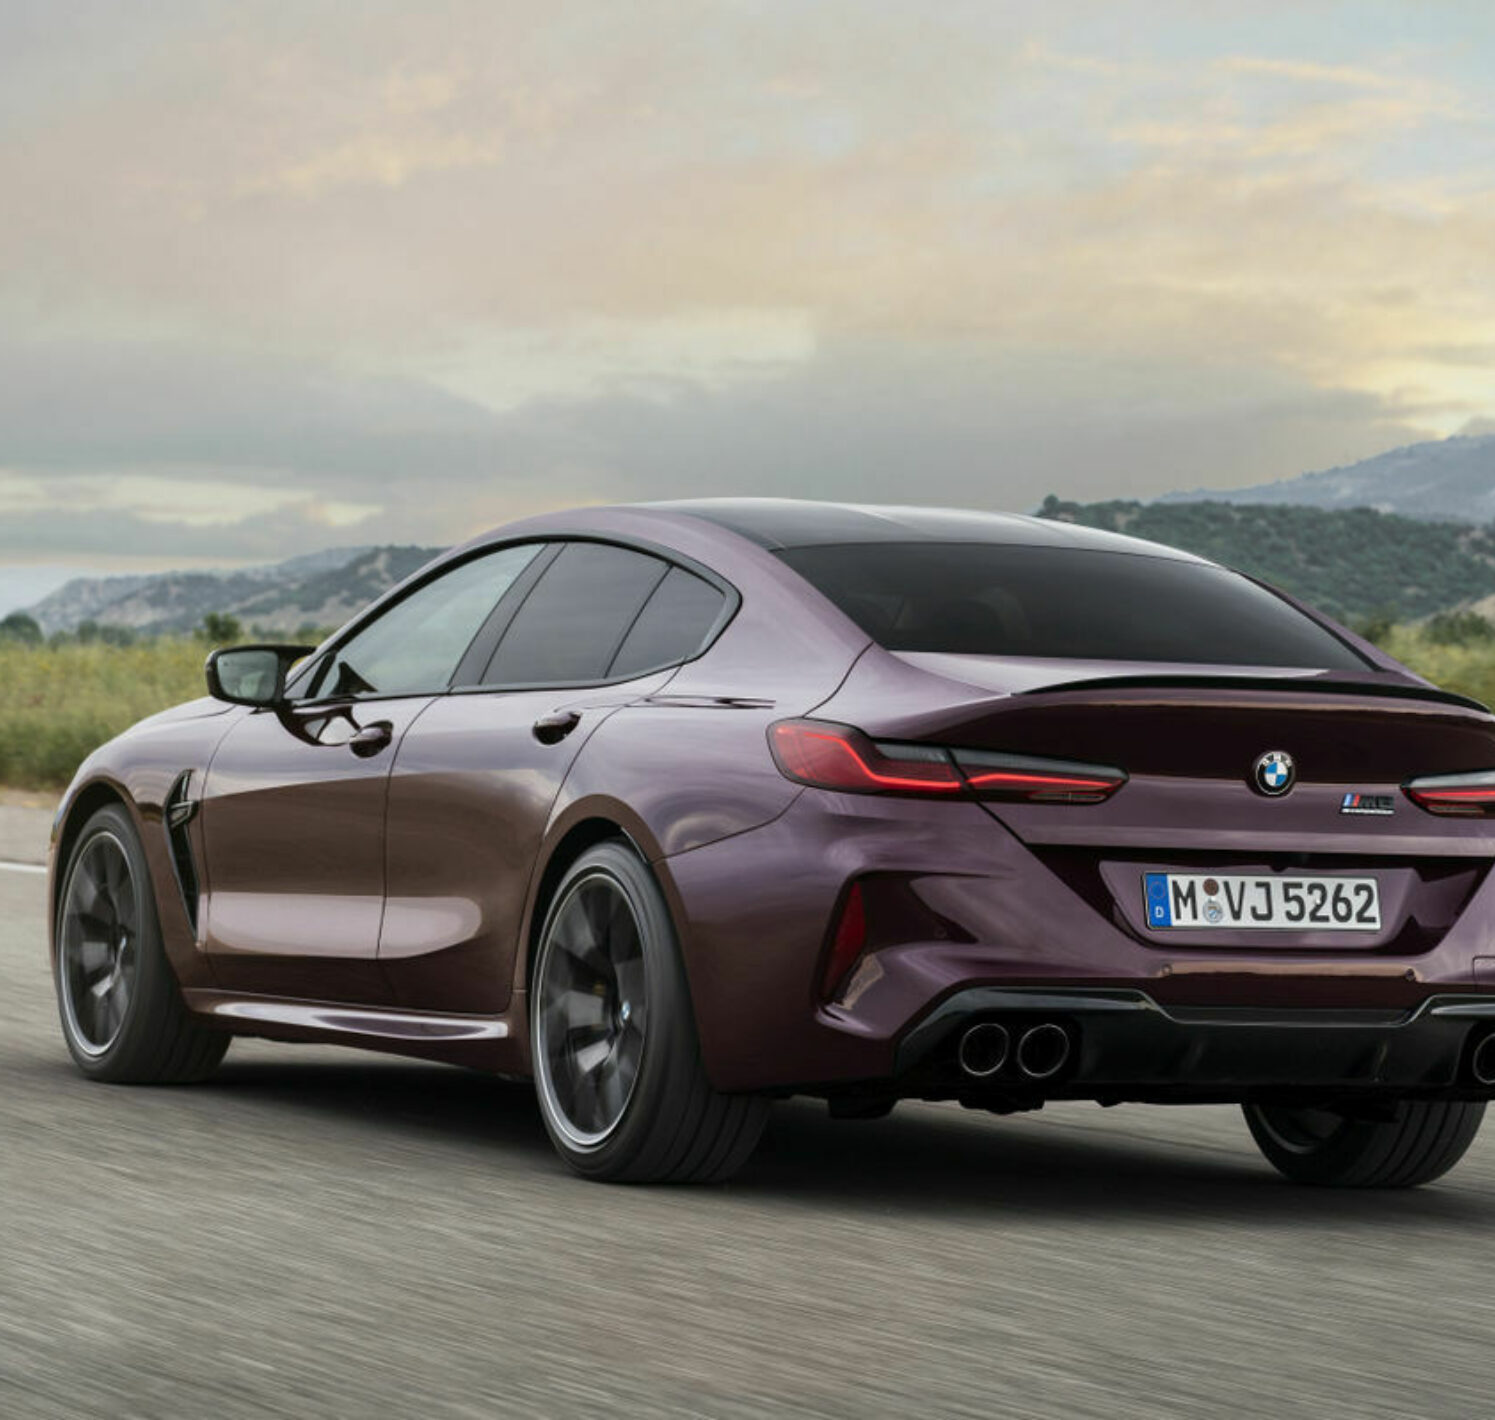 https://autofilter.sk/assets/images/rad-8-gran-coupe-2/gallery/p90369579-high-res-the-new-bmw-m8-gran-galeria.jpg - obrazok